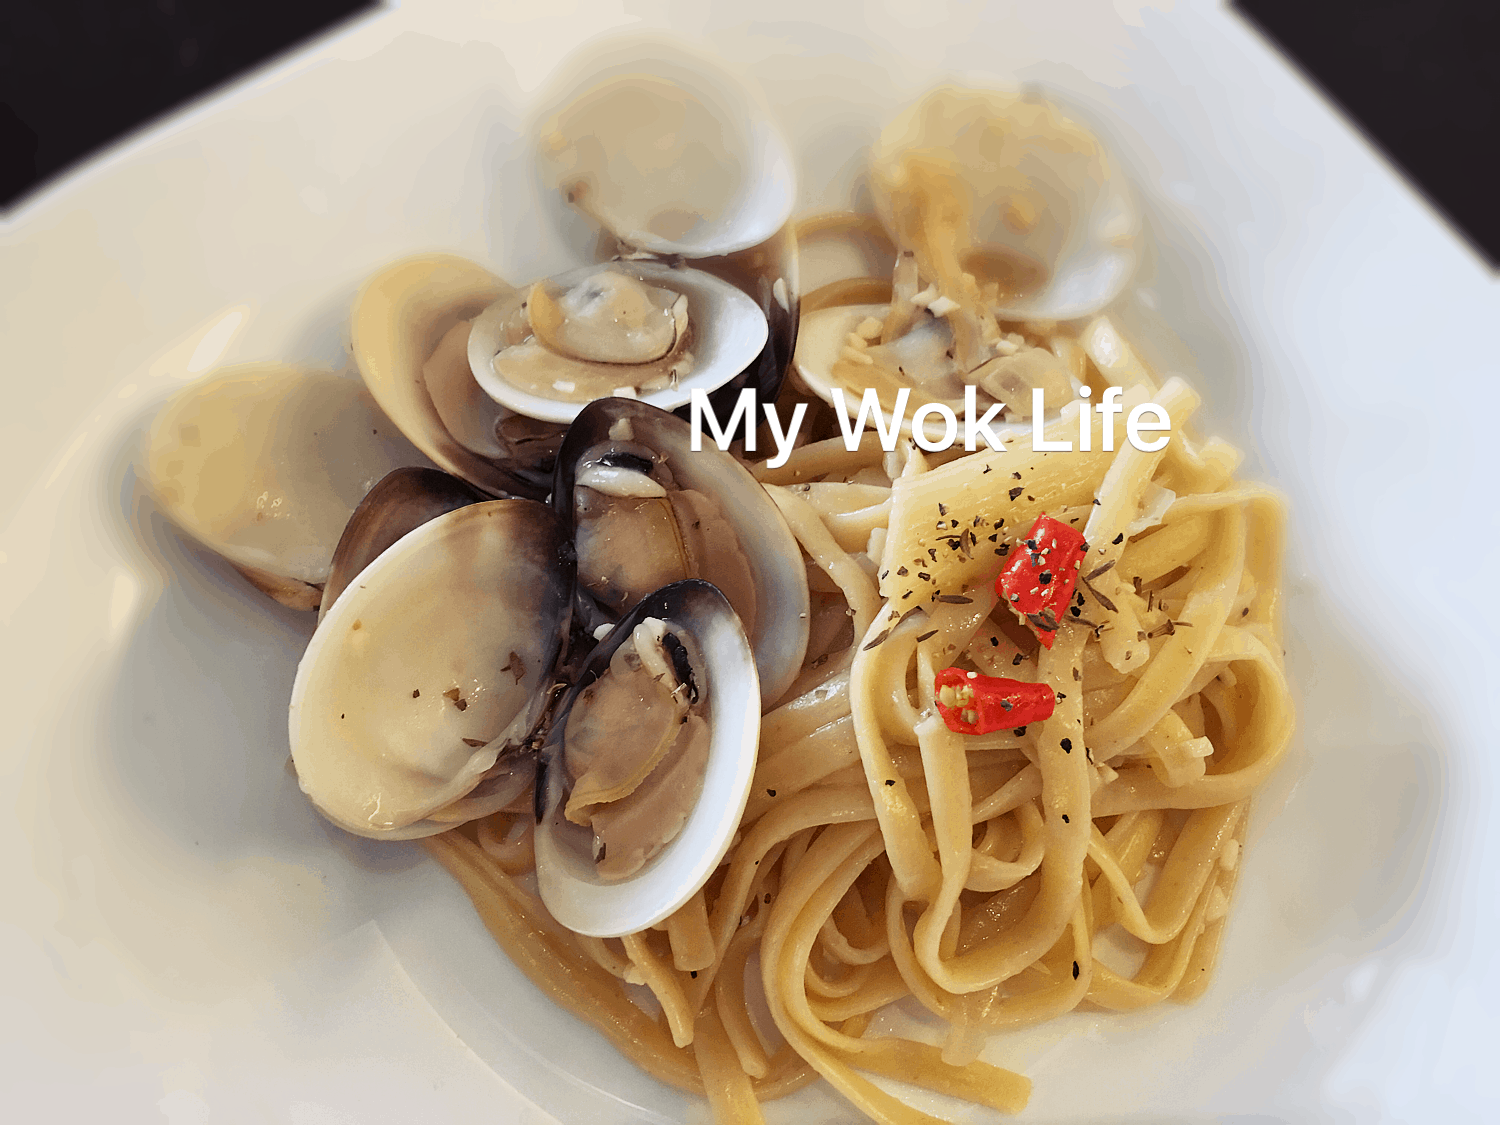 My Wok Life Cooking Blog Linguine alle Vongole (Clams Linguine Pasta) : My Family Favourite Dish